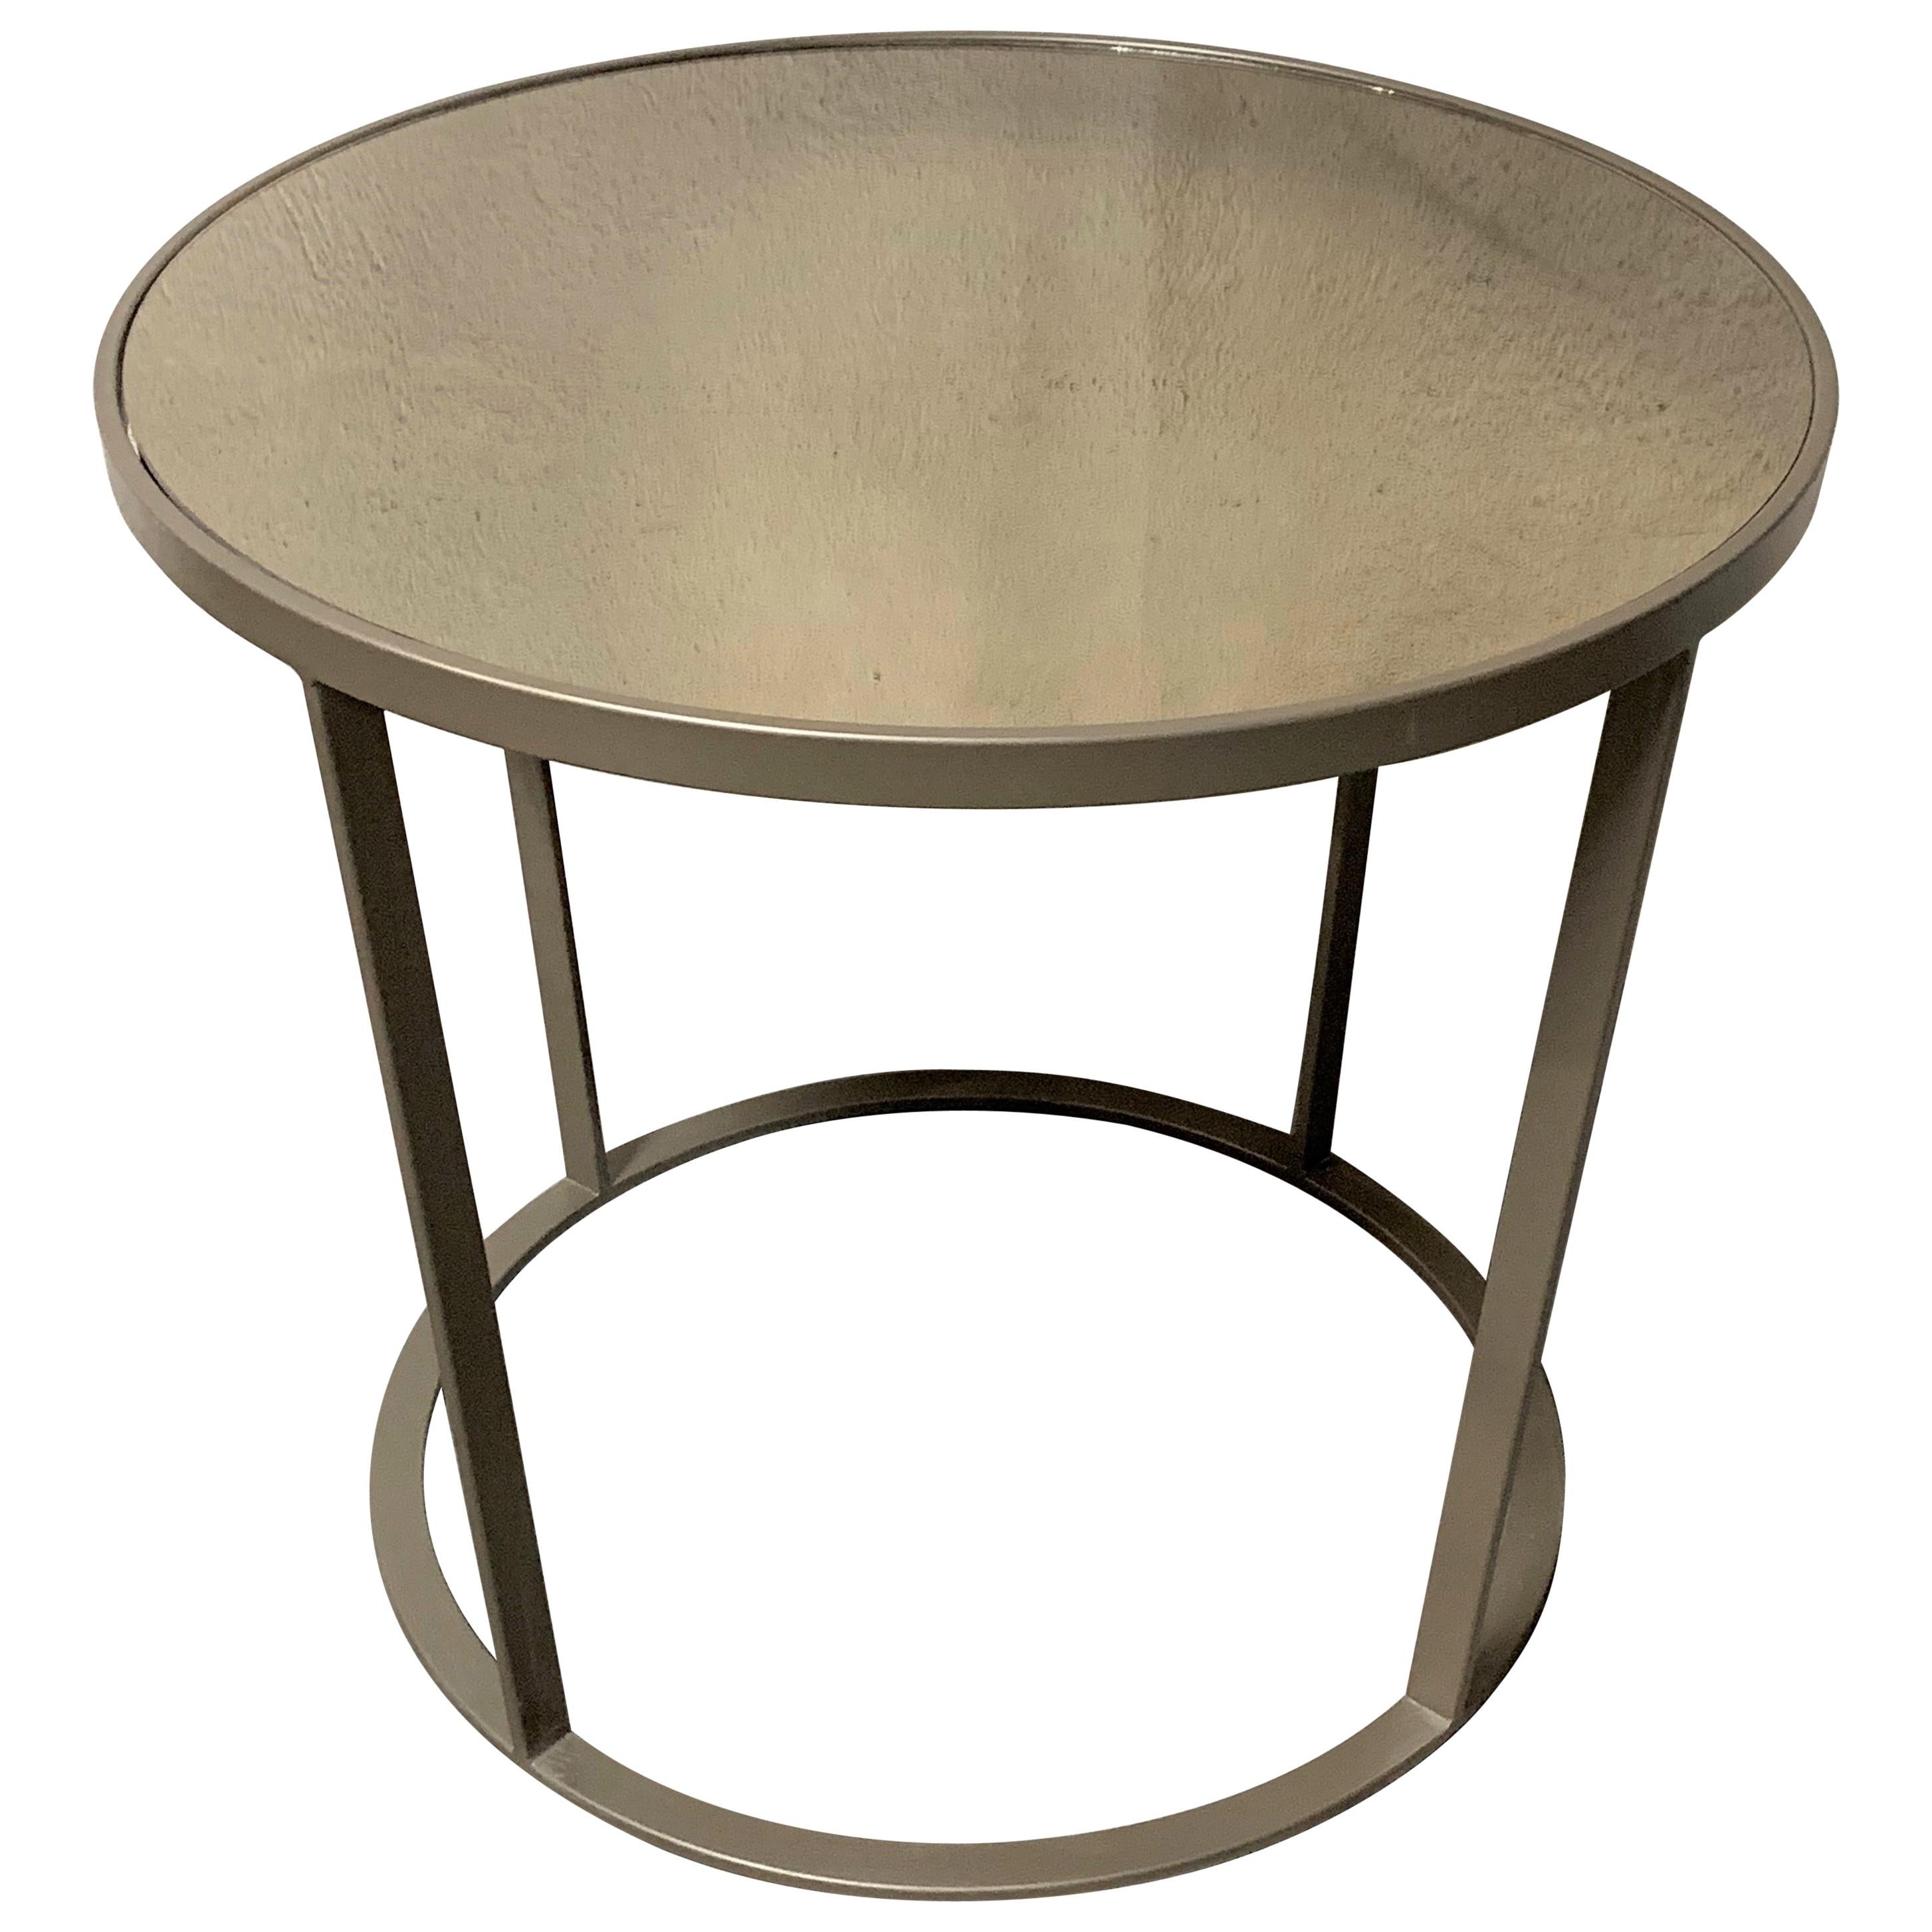 New Coffee or Side Table in Champagne Color with Smoked Mirrored Glass Top For Sale